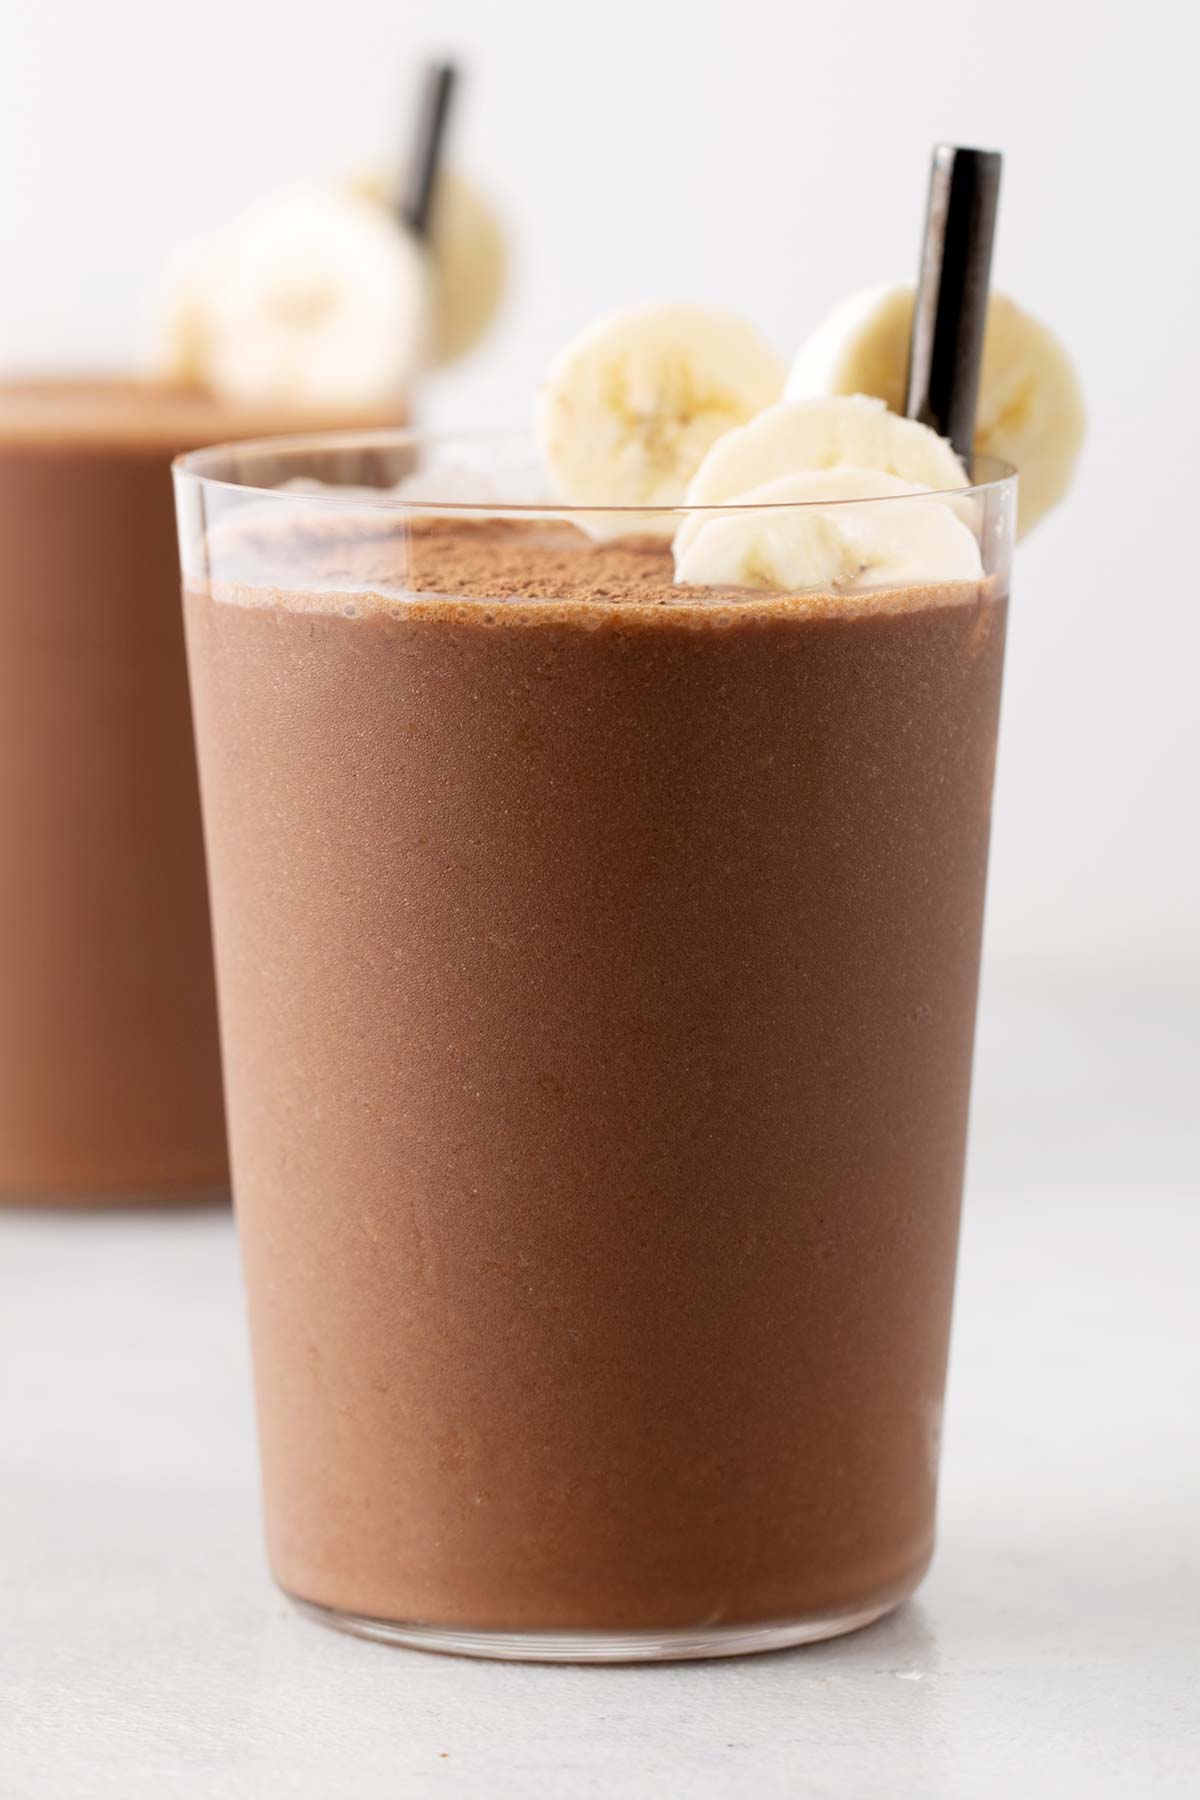 Chocolate smoothie in a glass.